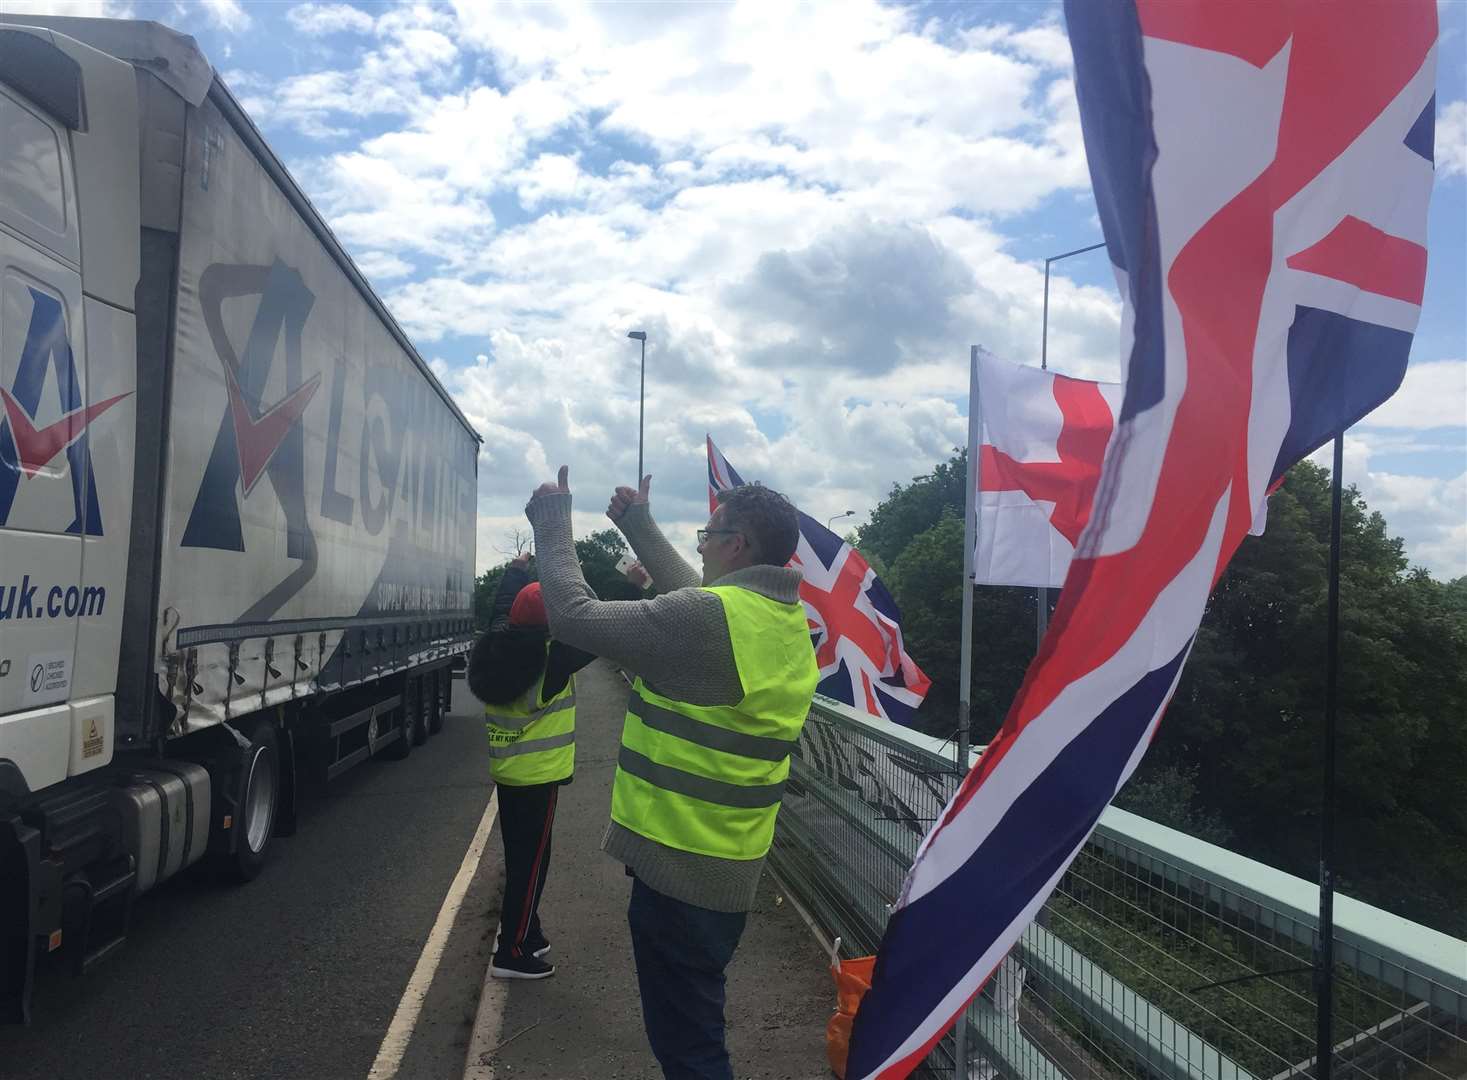 Brexit supports have draped a banner over a bridge on the A2, asking drivers to 'toot to leave'